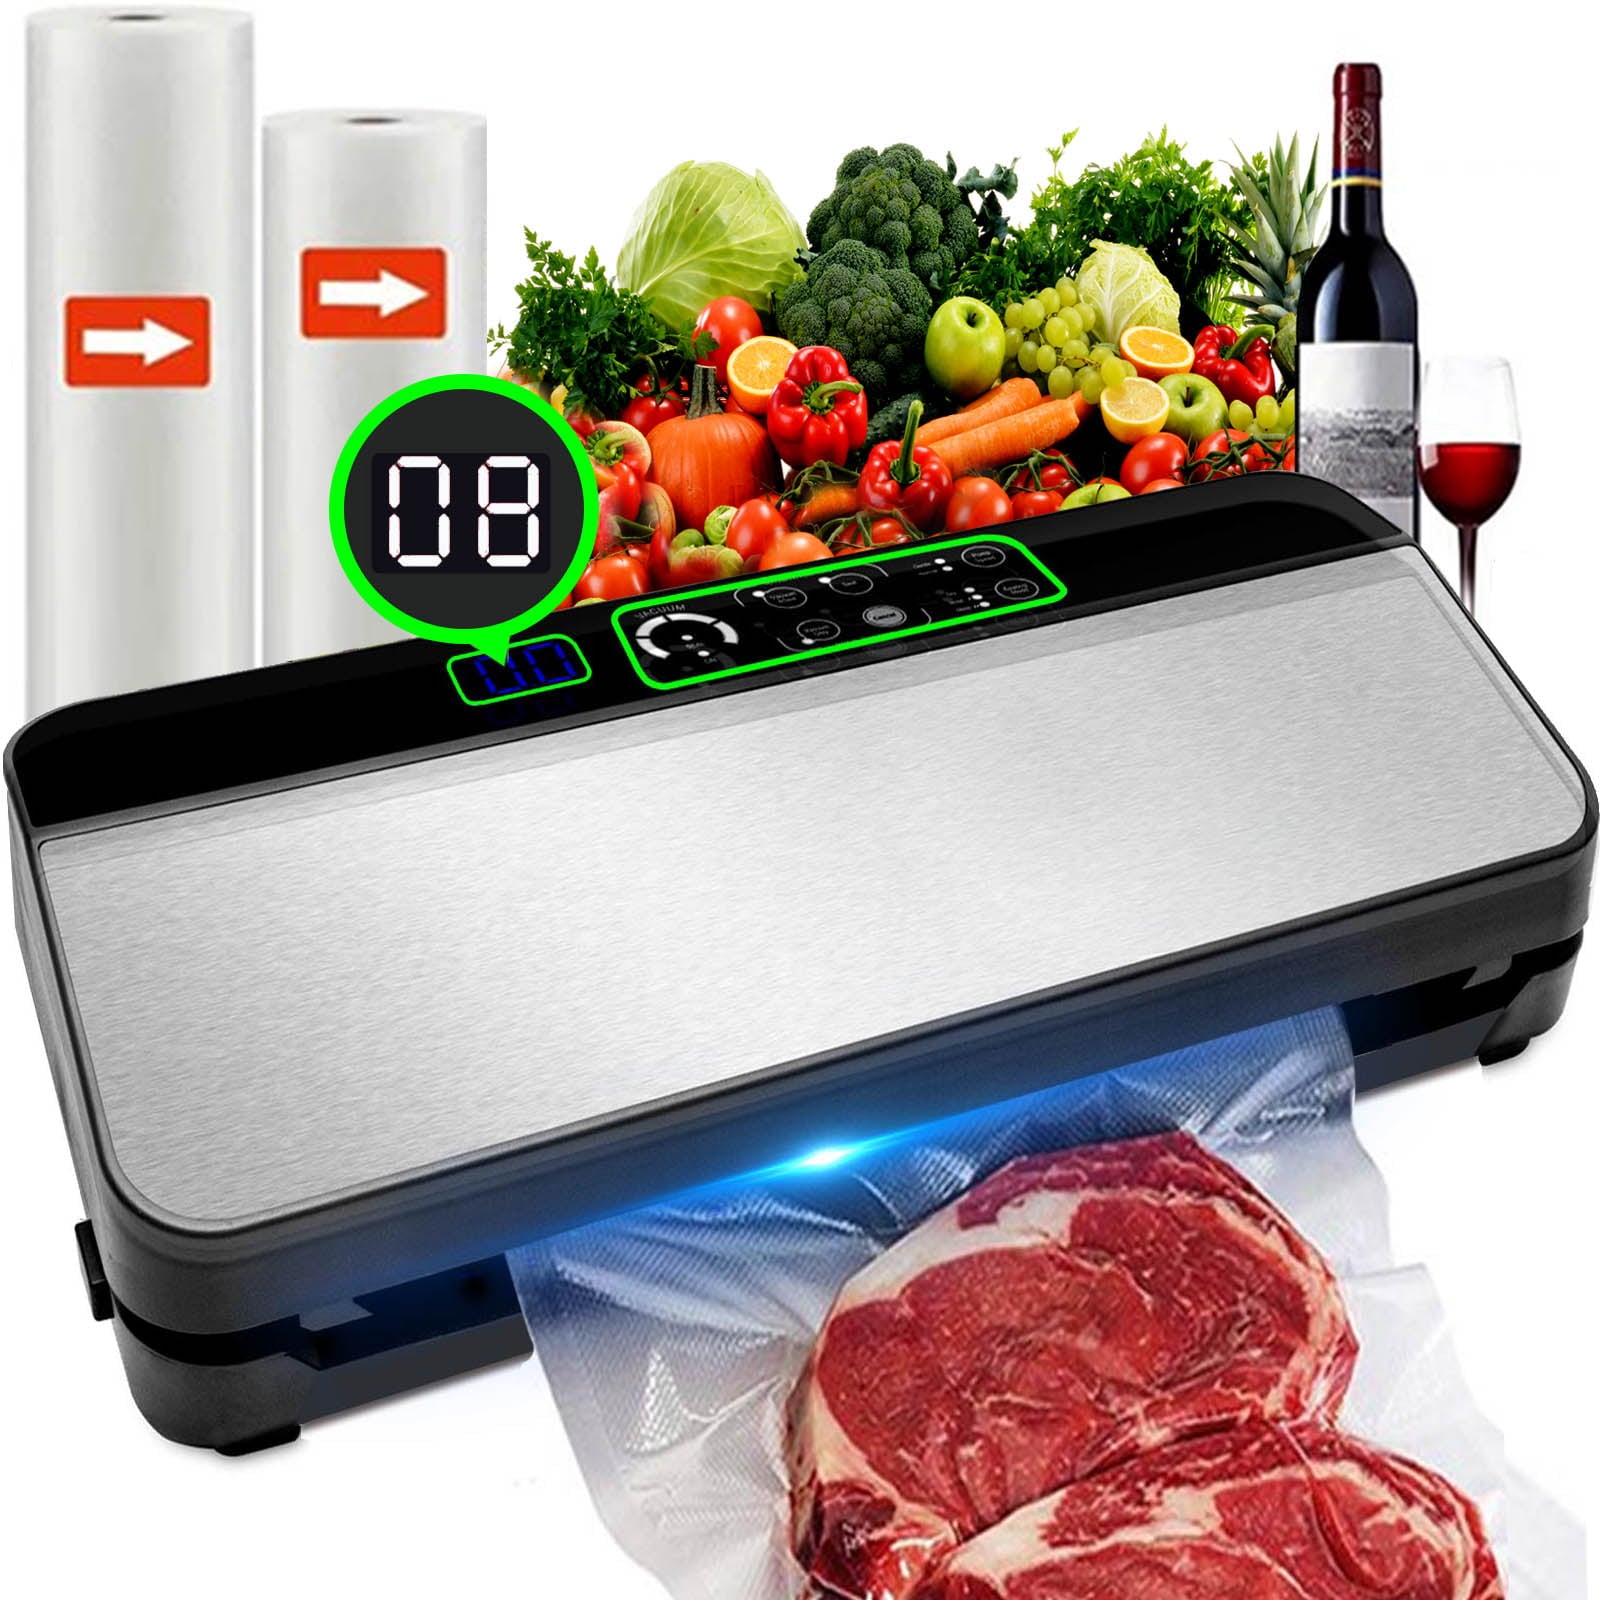 HKEEY Food Saver Vacuum Sealer Machine with 2 Rolls Food Vacuum Sealer  Bags，Dry & Moist Food Modes, Led Indicator Lights, Easy to Clean, Compact